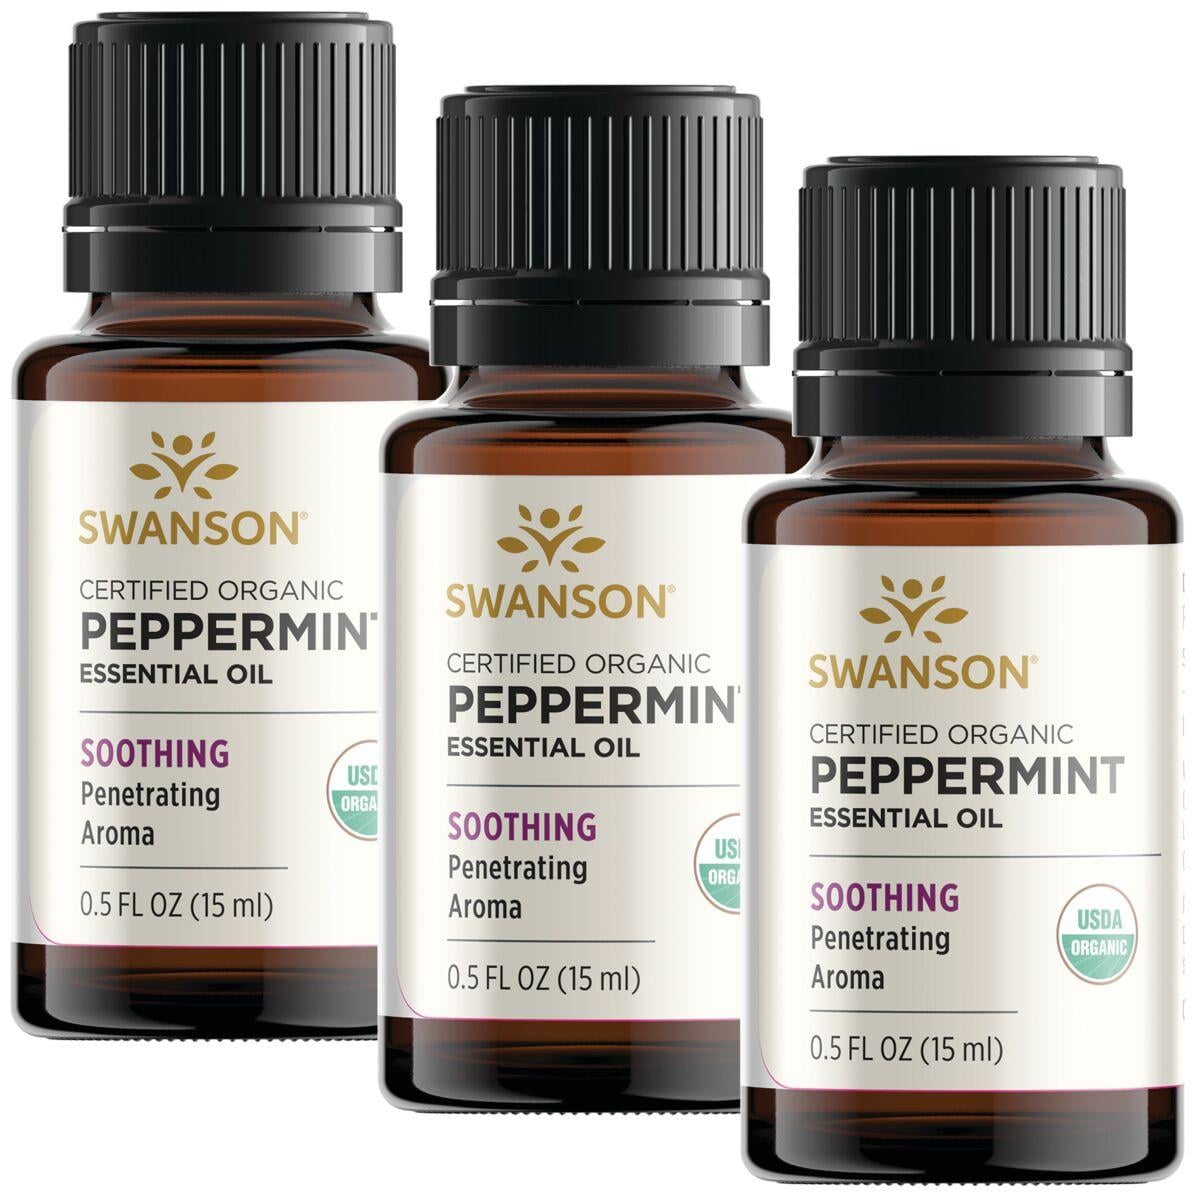 Swanson Aromatherapy Certified Organic Peppermint - 3 Pack 0.5 fl oz Per Bottle Essential Oils